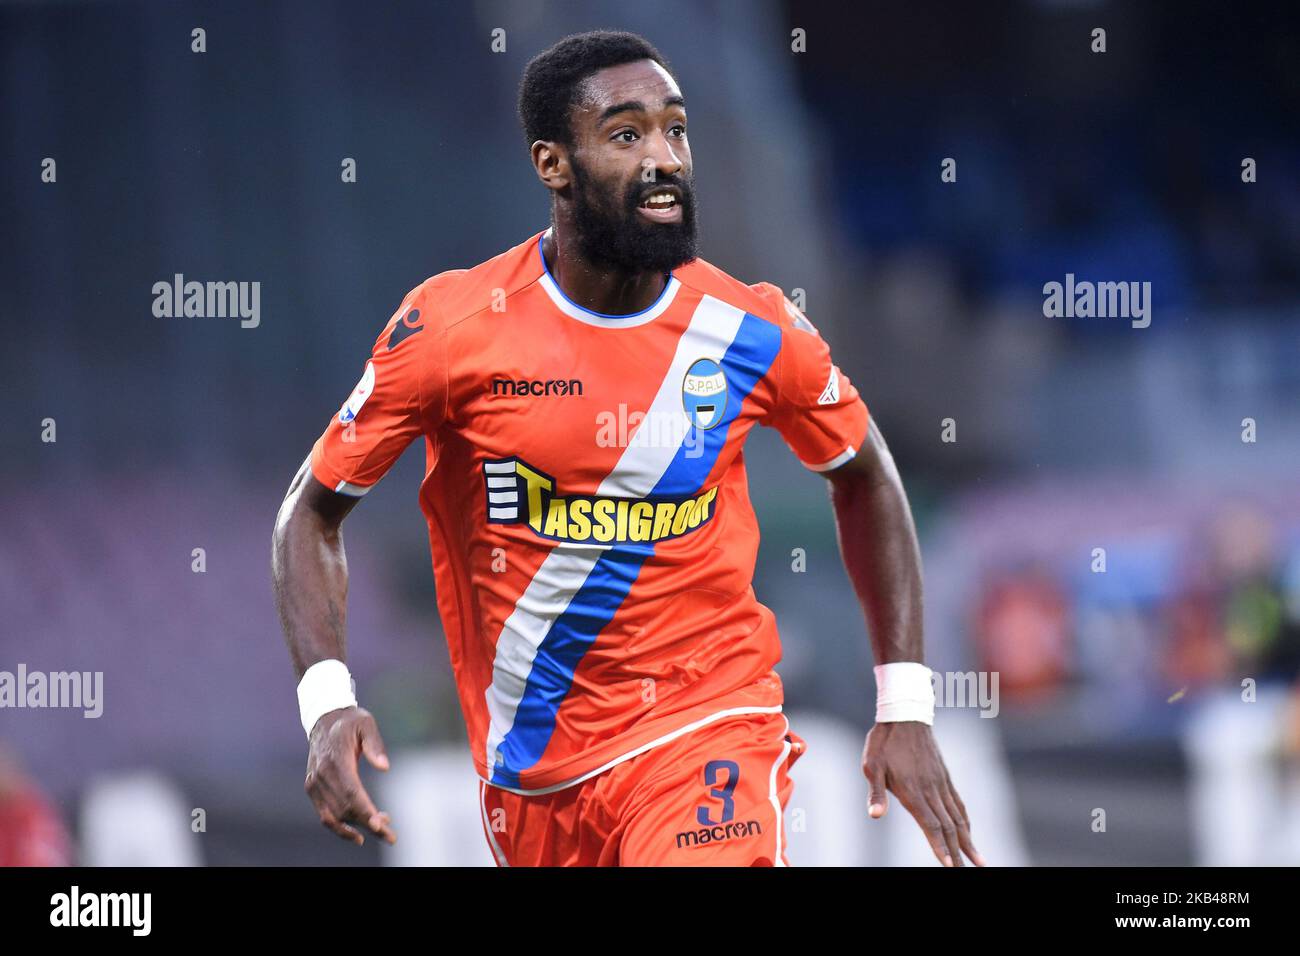 Johan Djourou of Spal during the Serie A TIM match between SSC Napoli and Spal at Stadio San Paolo Naples Italy on 22 December 2018. (Photo Franco Romano) Stock Photo